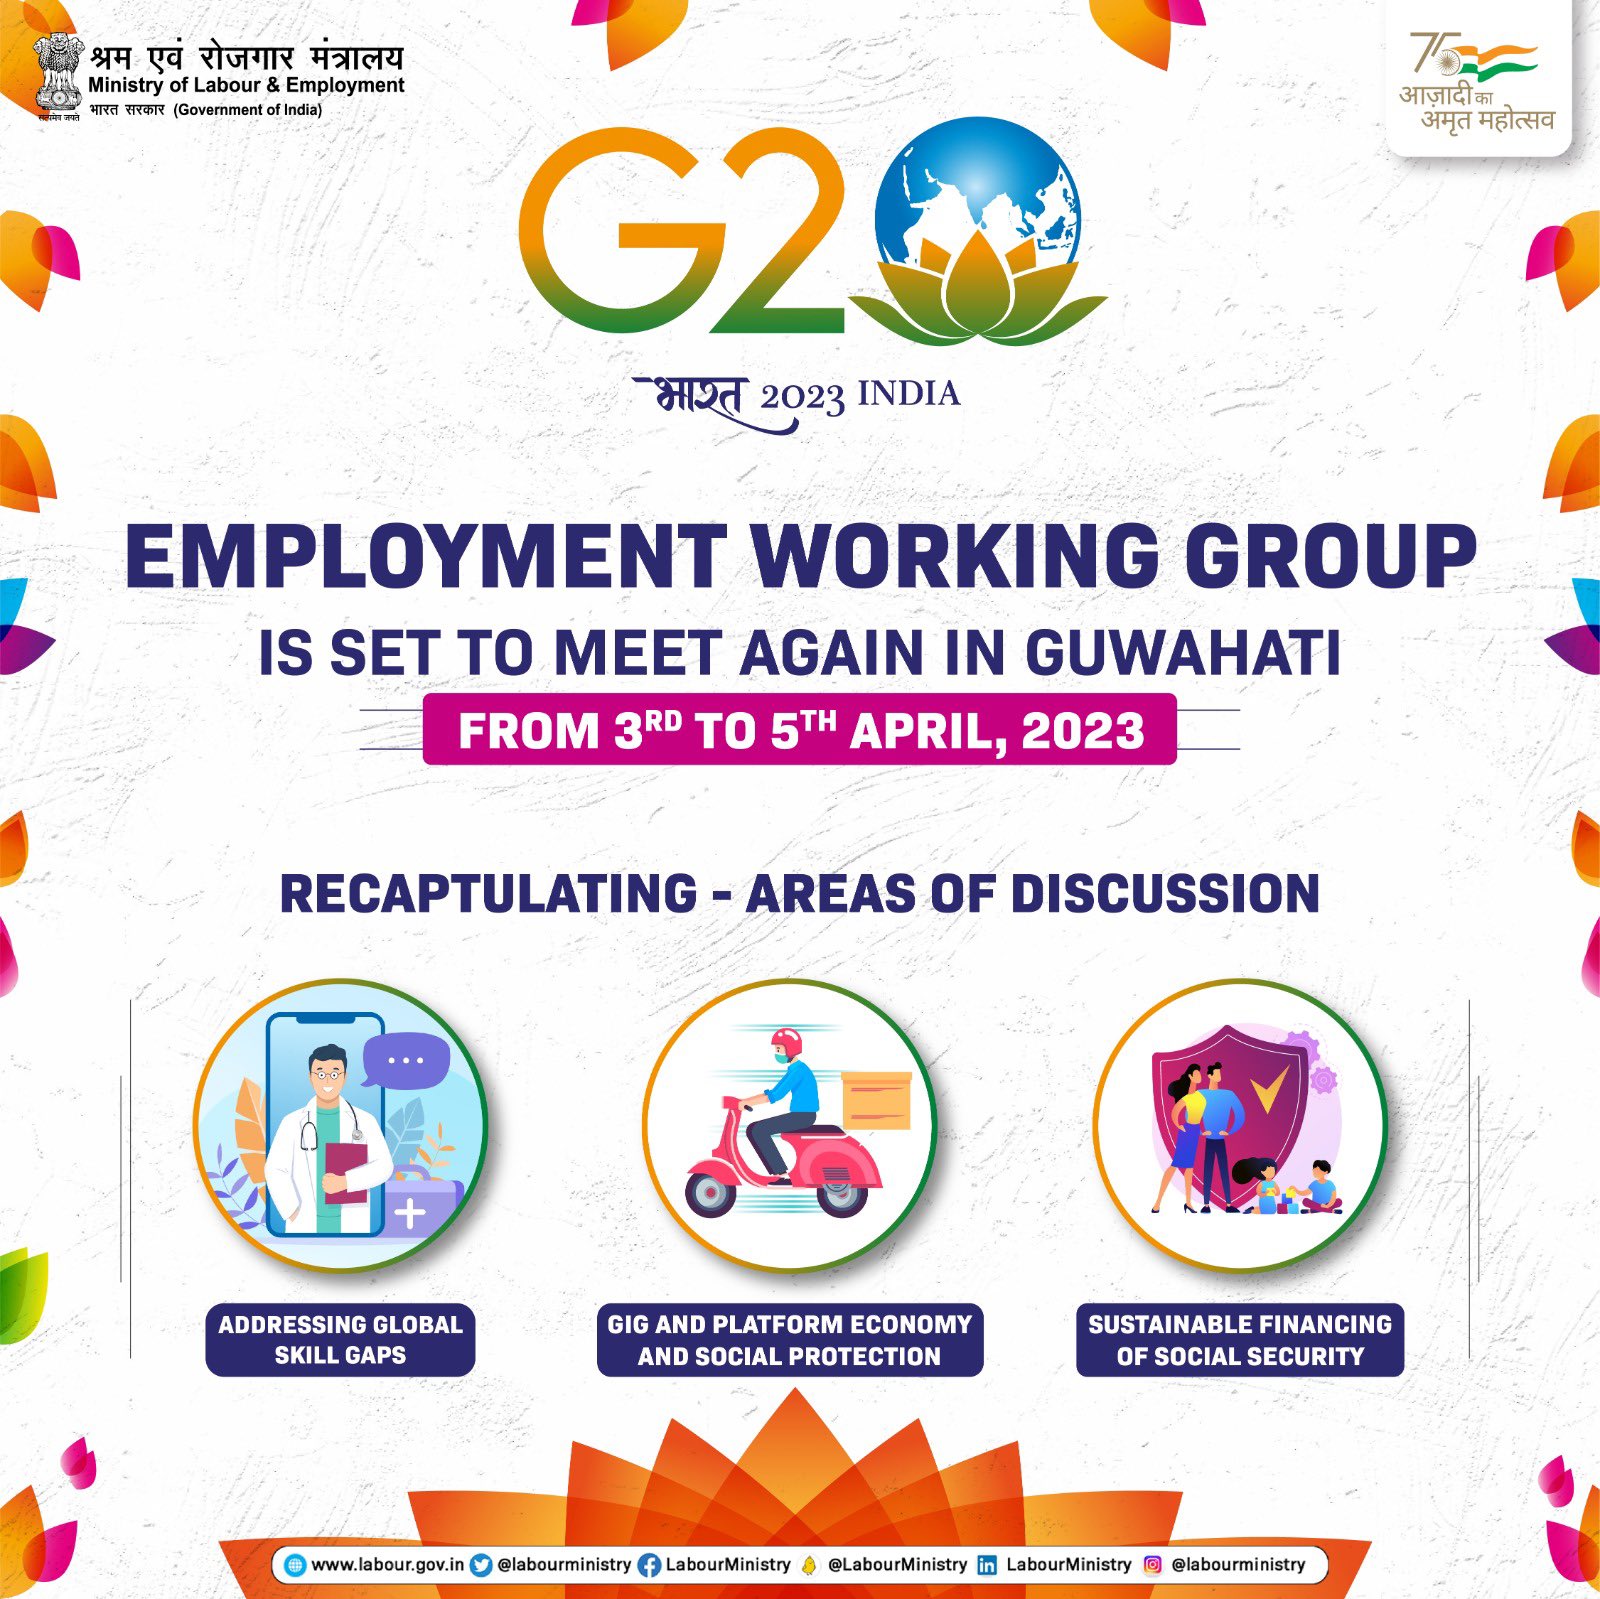 Employment Working Group is set to meet again in Guwahati from 3rd to 5th April, 2023. 